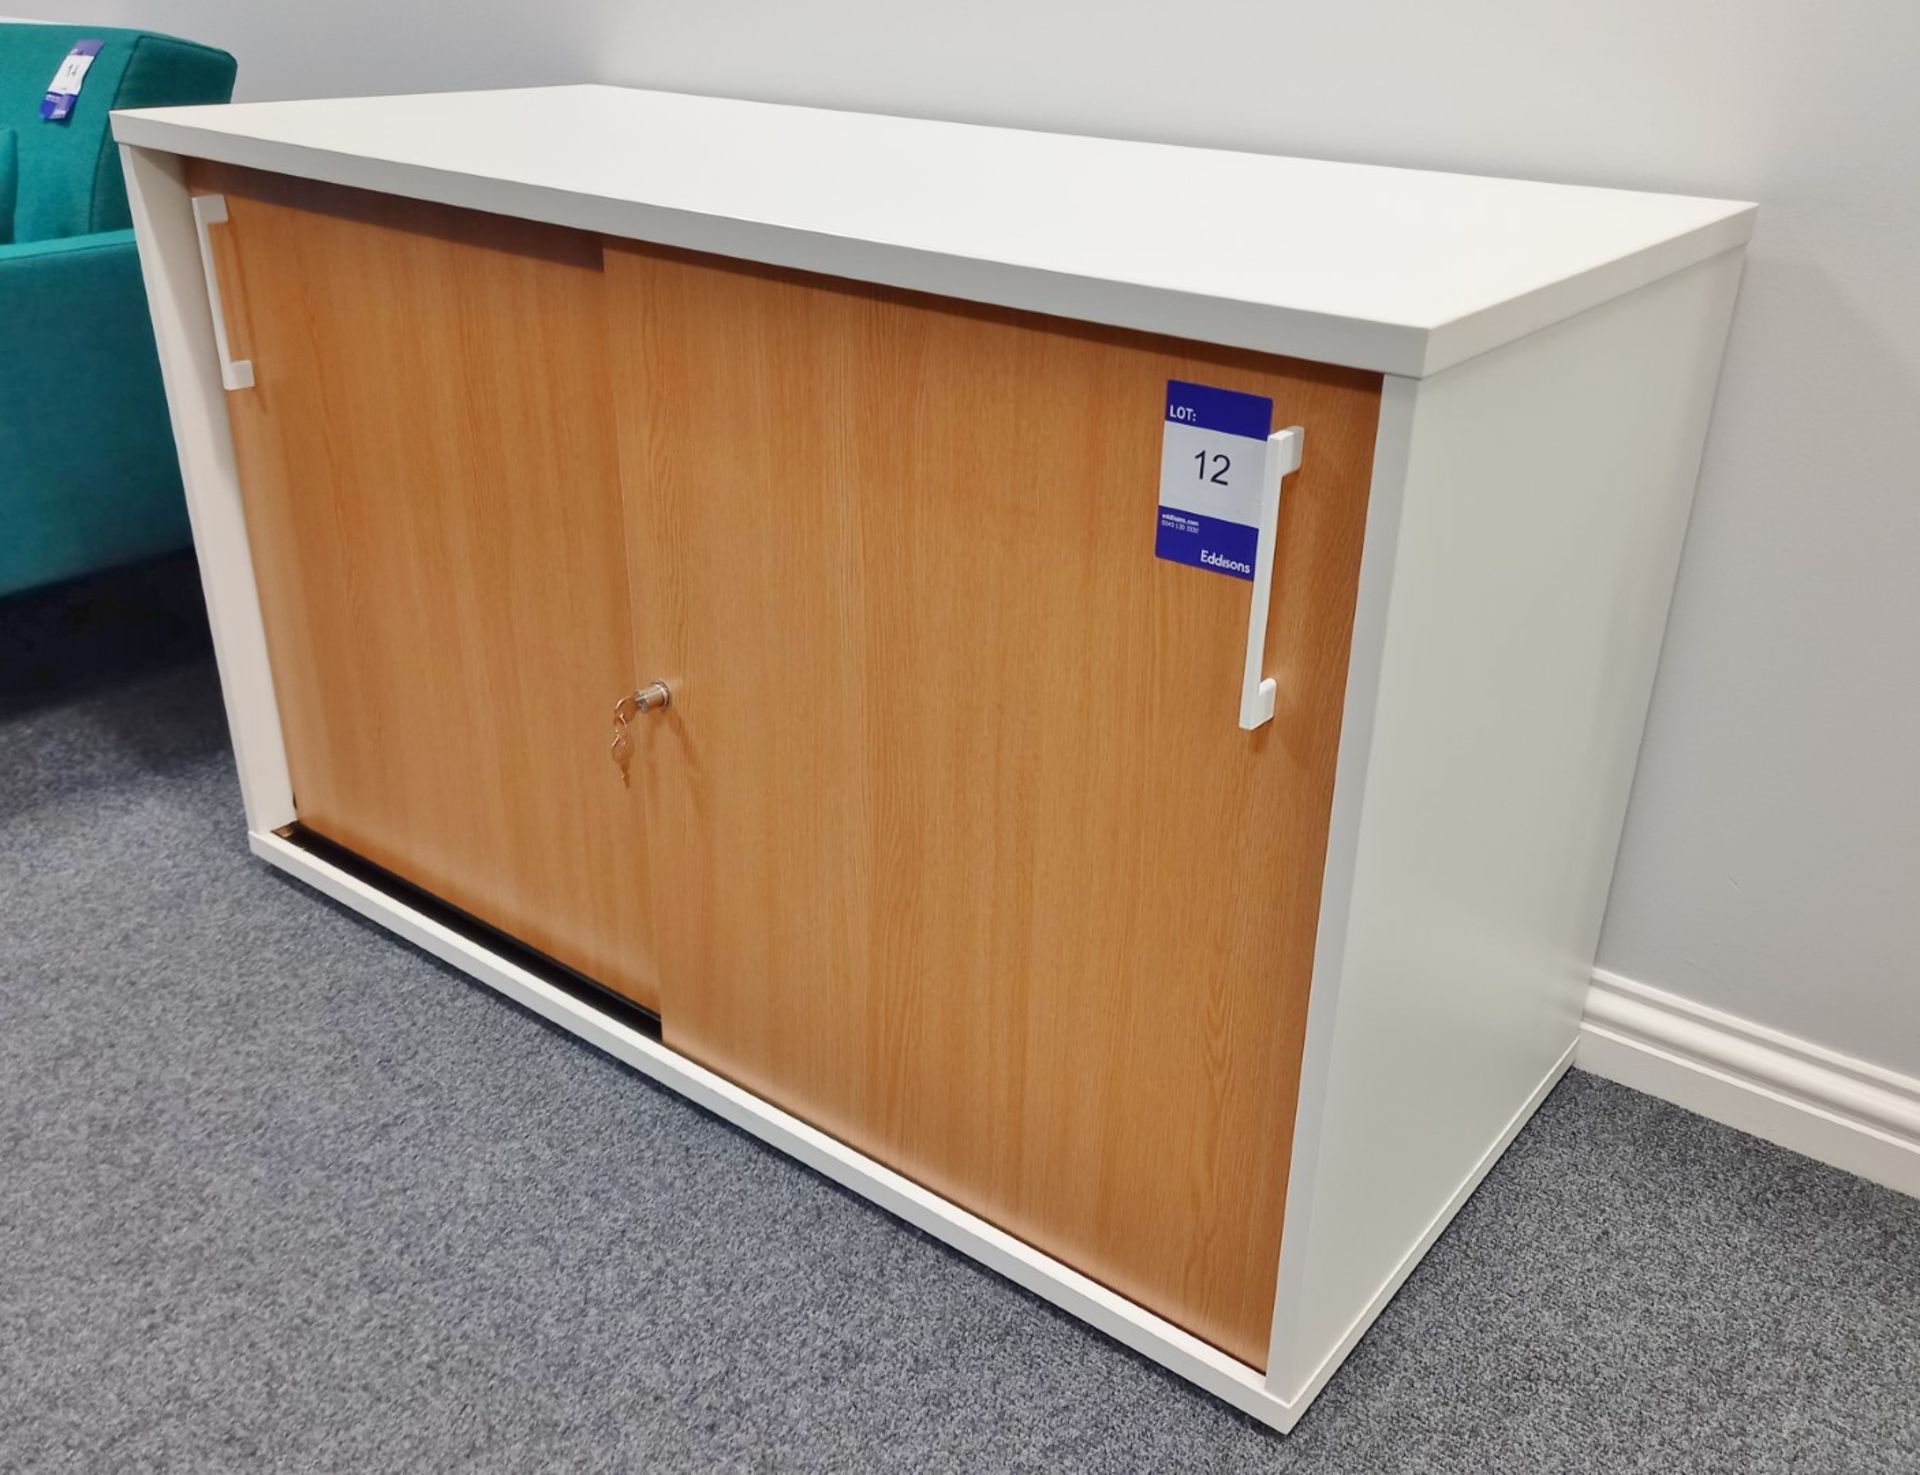 2 Tone Beech Effect Double Door Office Cabinet 720 x 1200 x 520 (contents not included) - Image 4 of 4